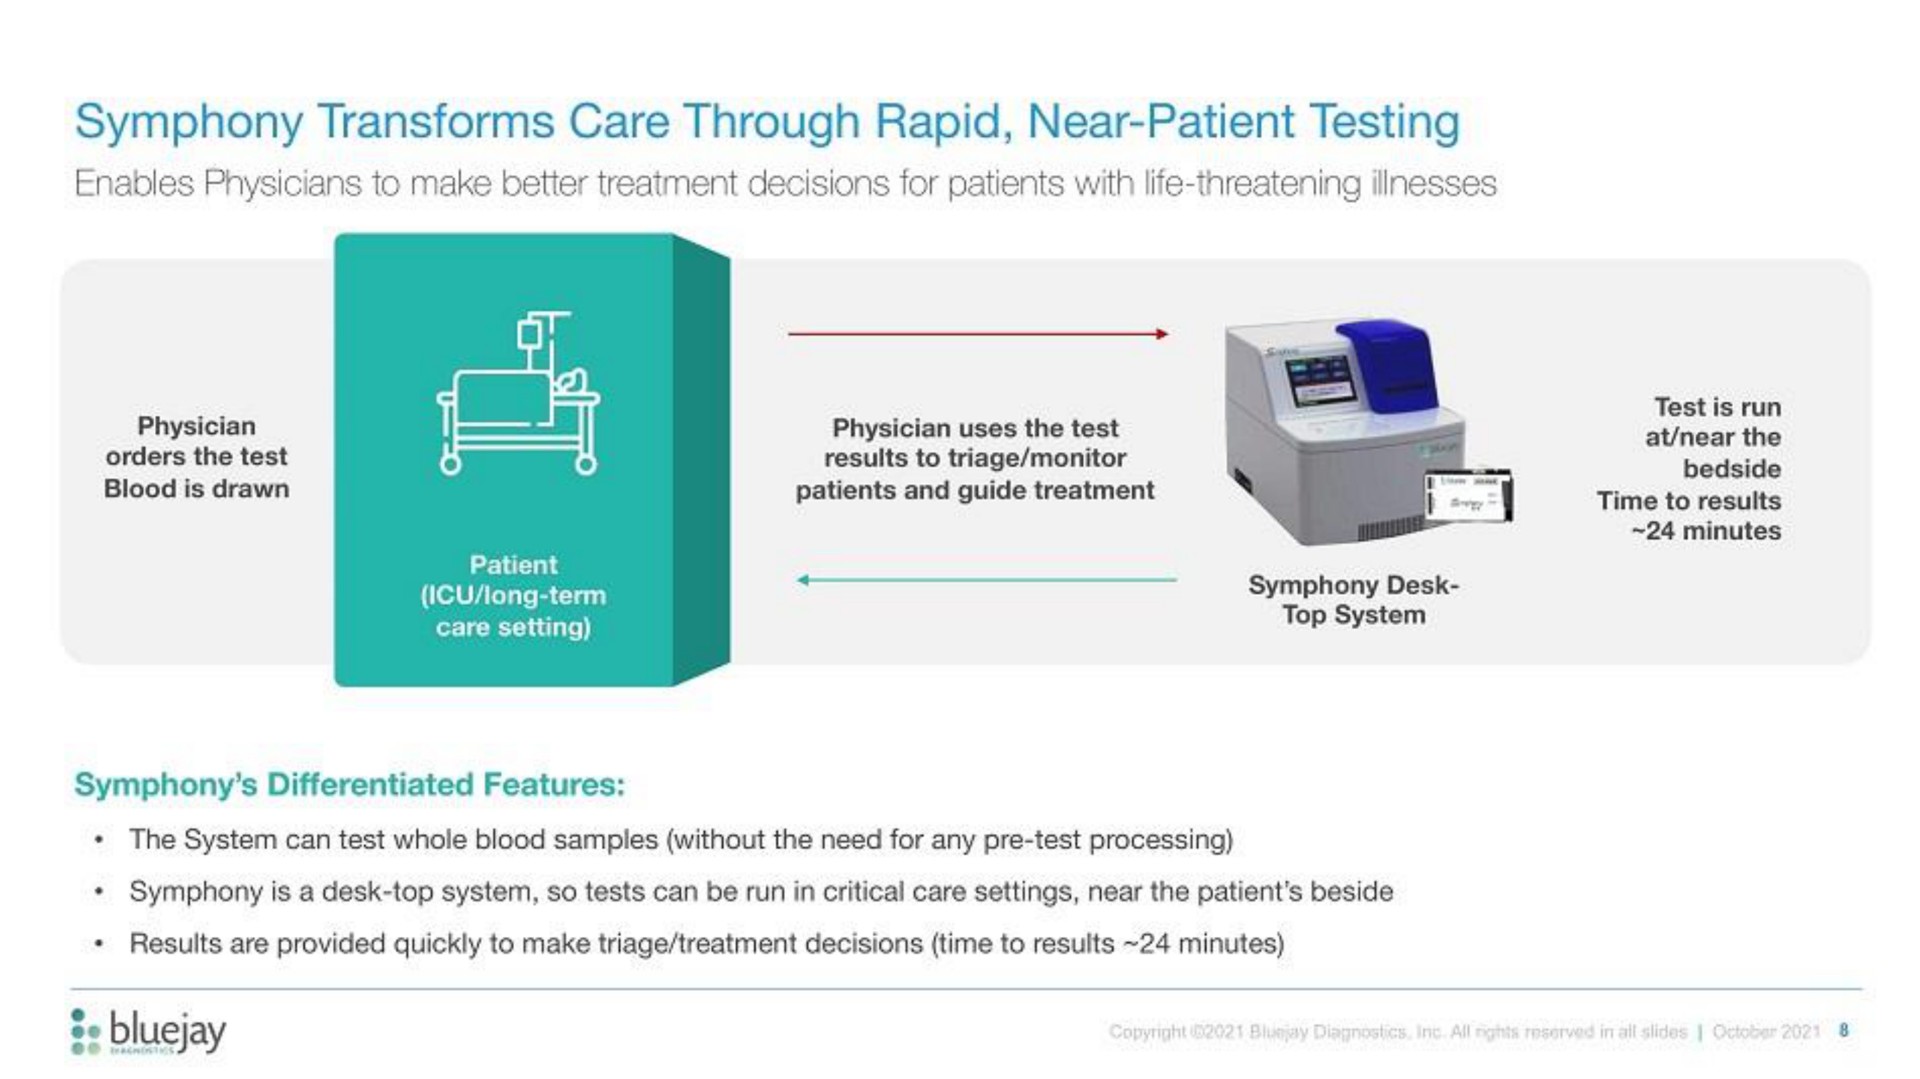 symphony transforms care through rapid near patient testing | Bluejay